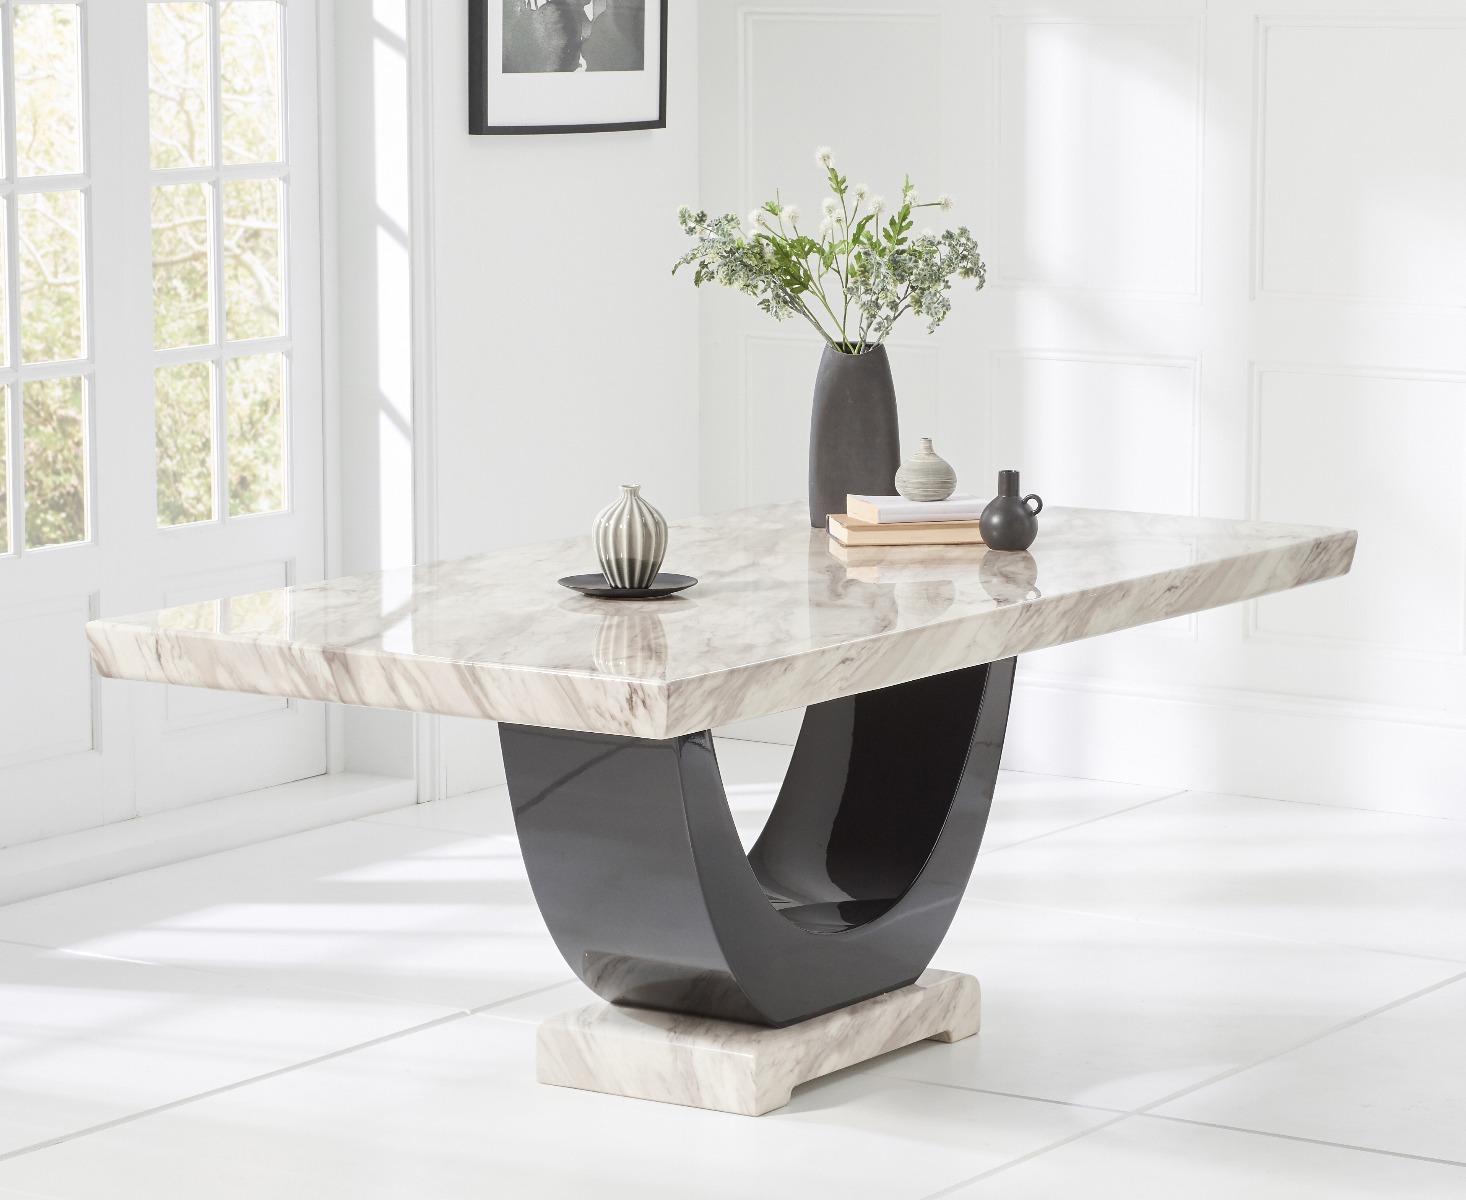 Photo 4 of Raphael 170cm cream and black pedestal marble dining table with 4 cream sophia chairs